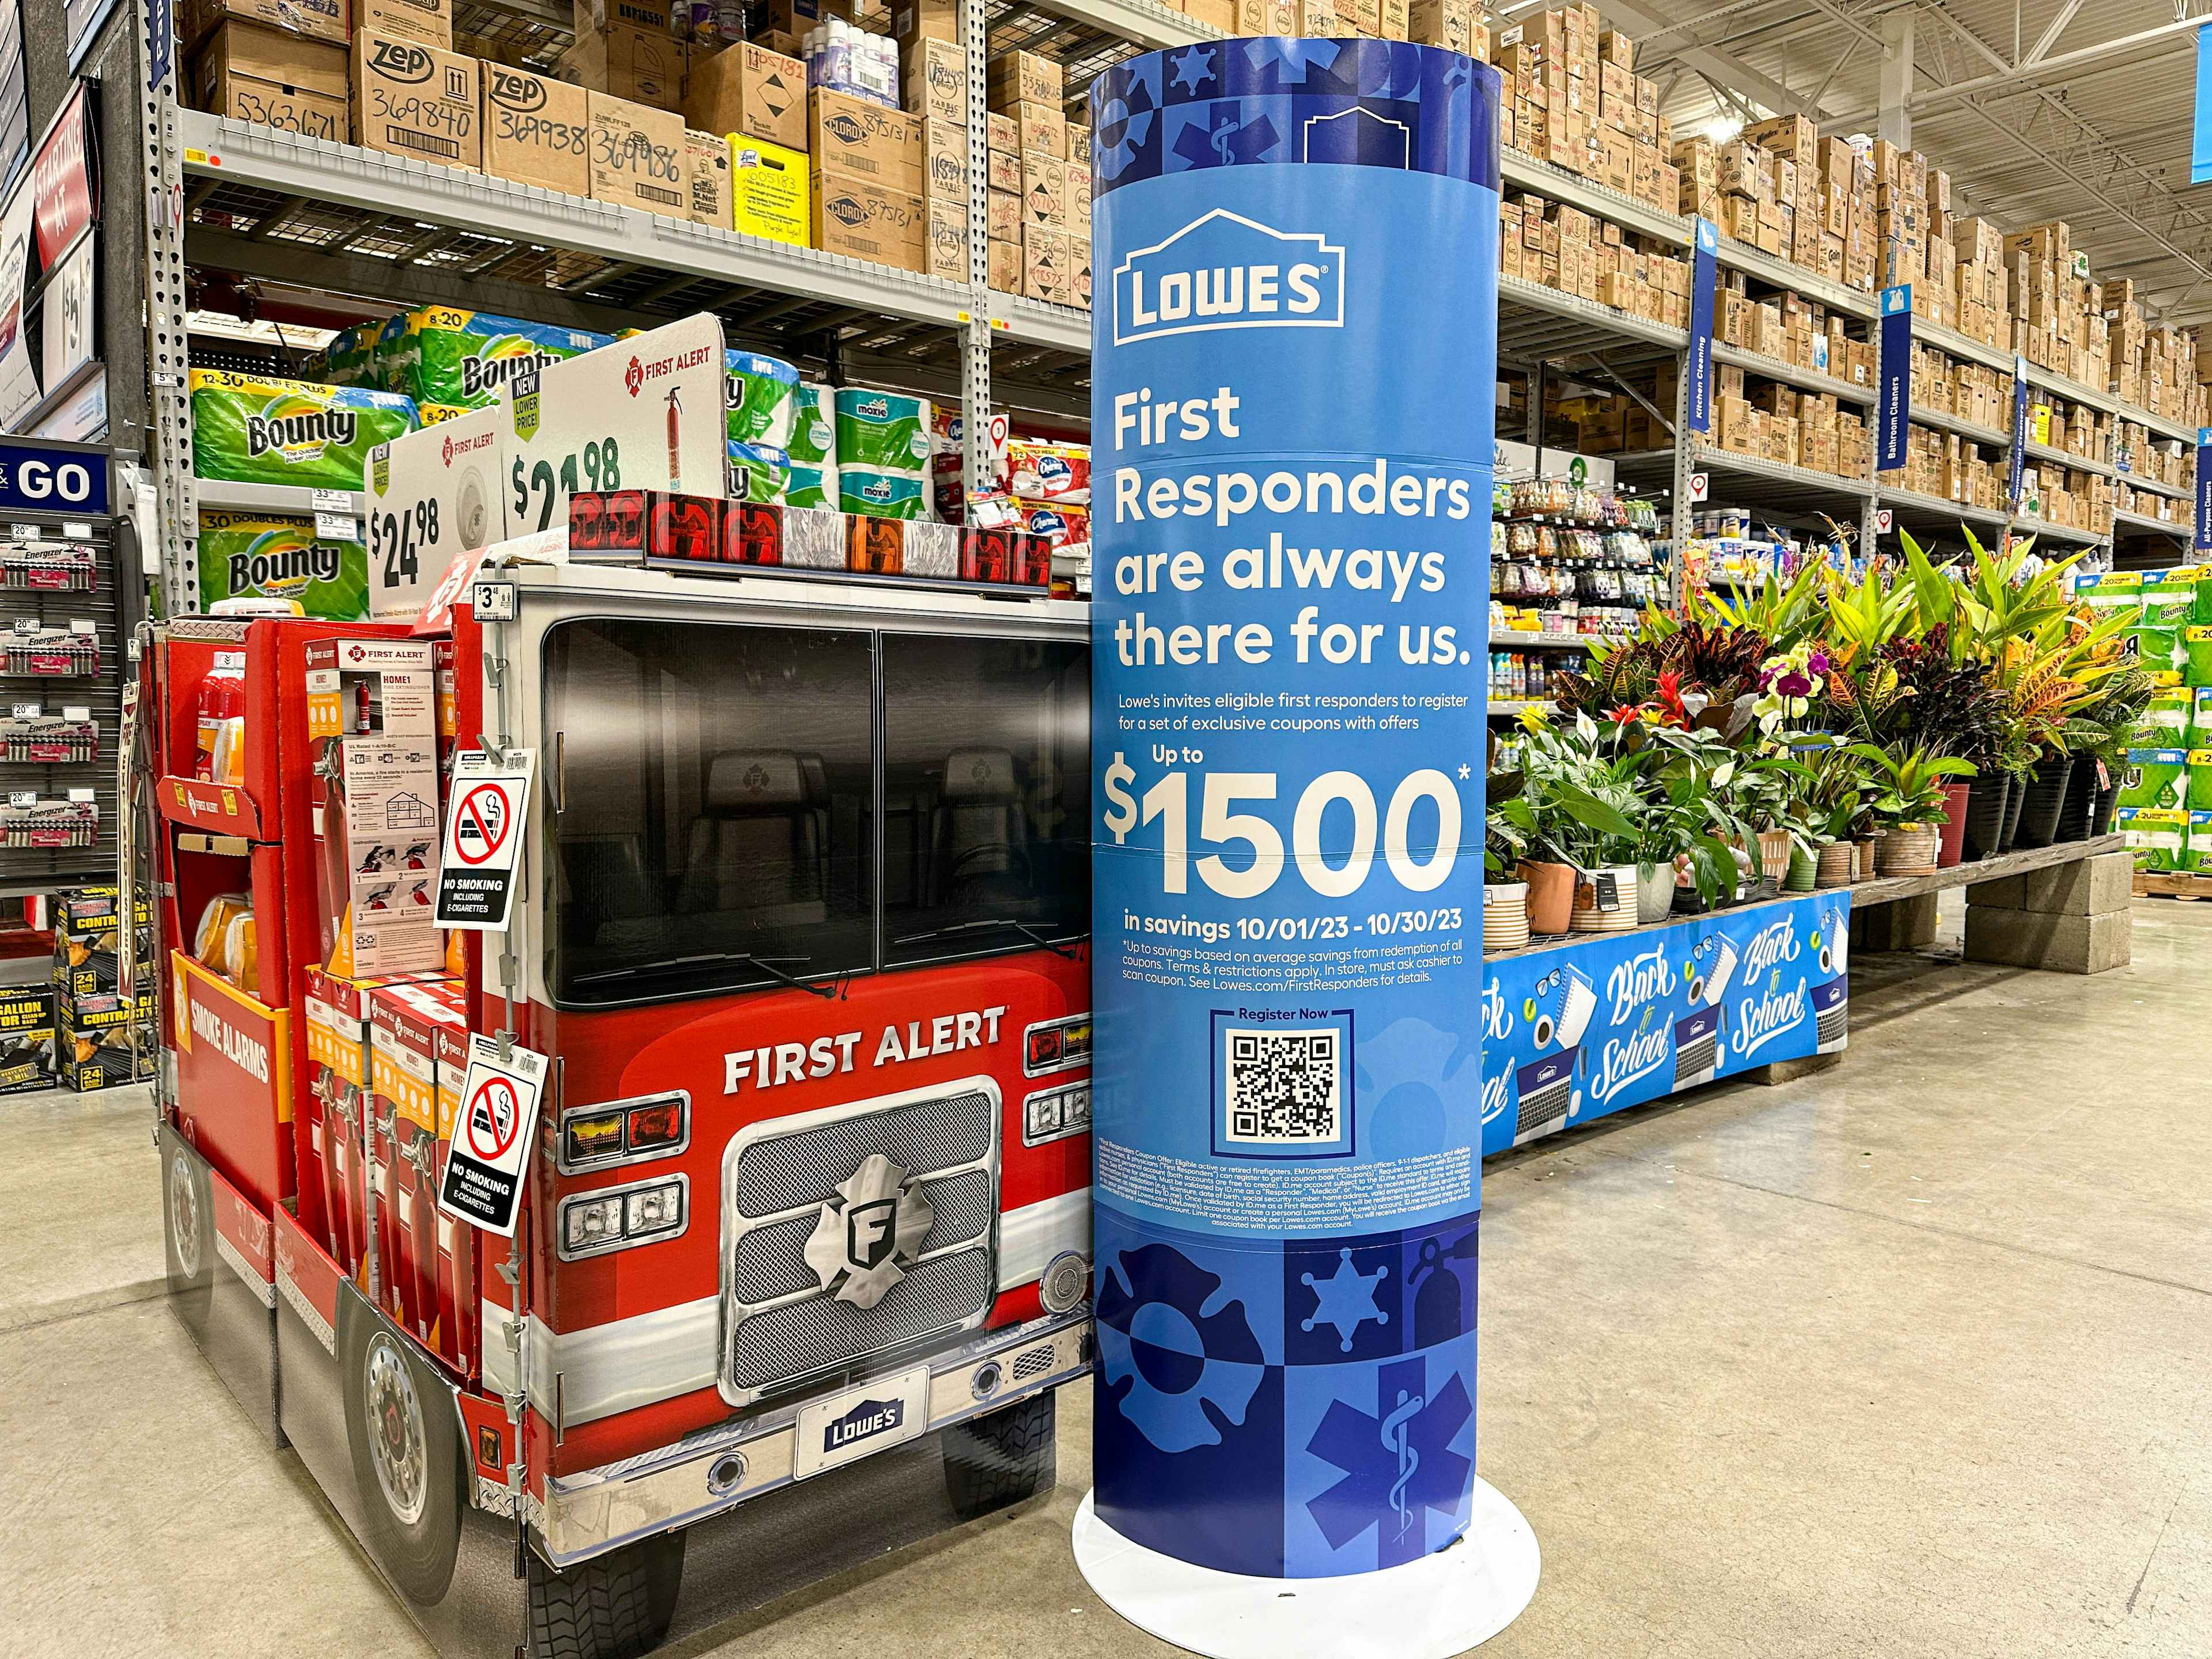 lowes first responder signage in store next to a cardboard fire truck display 